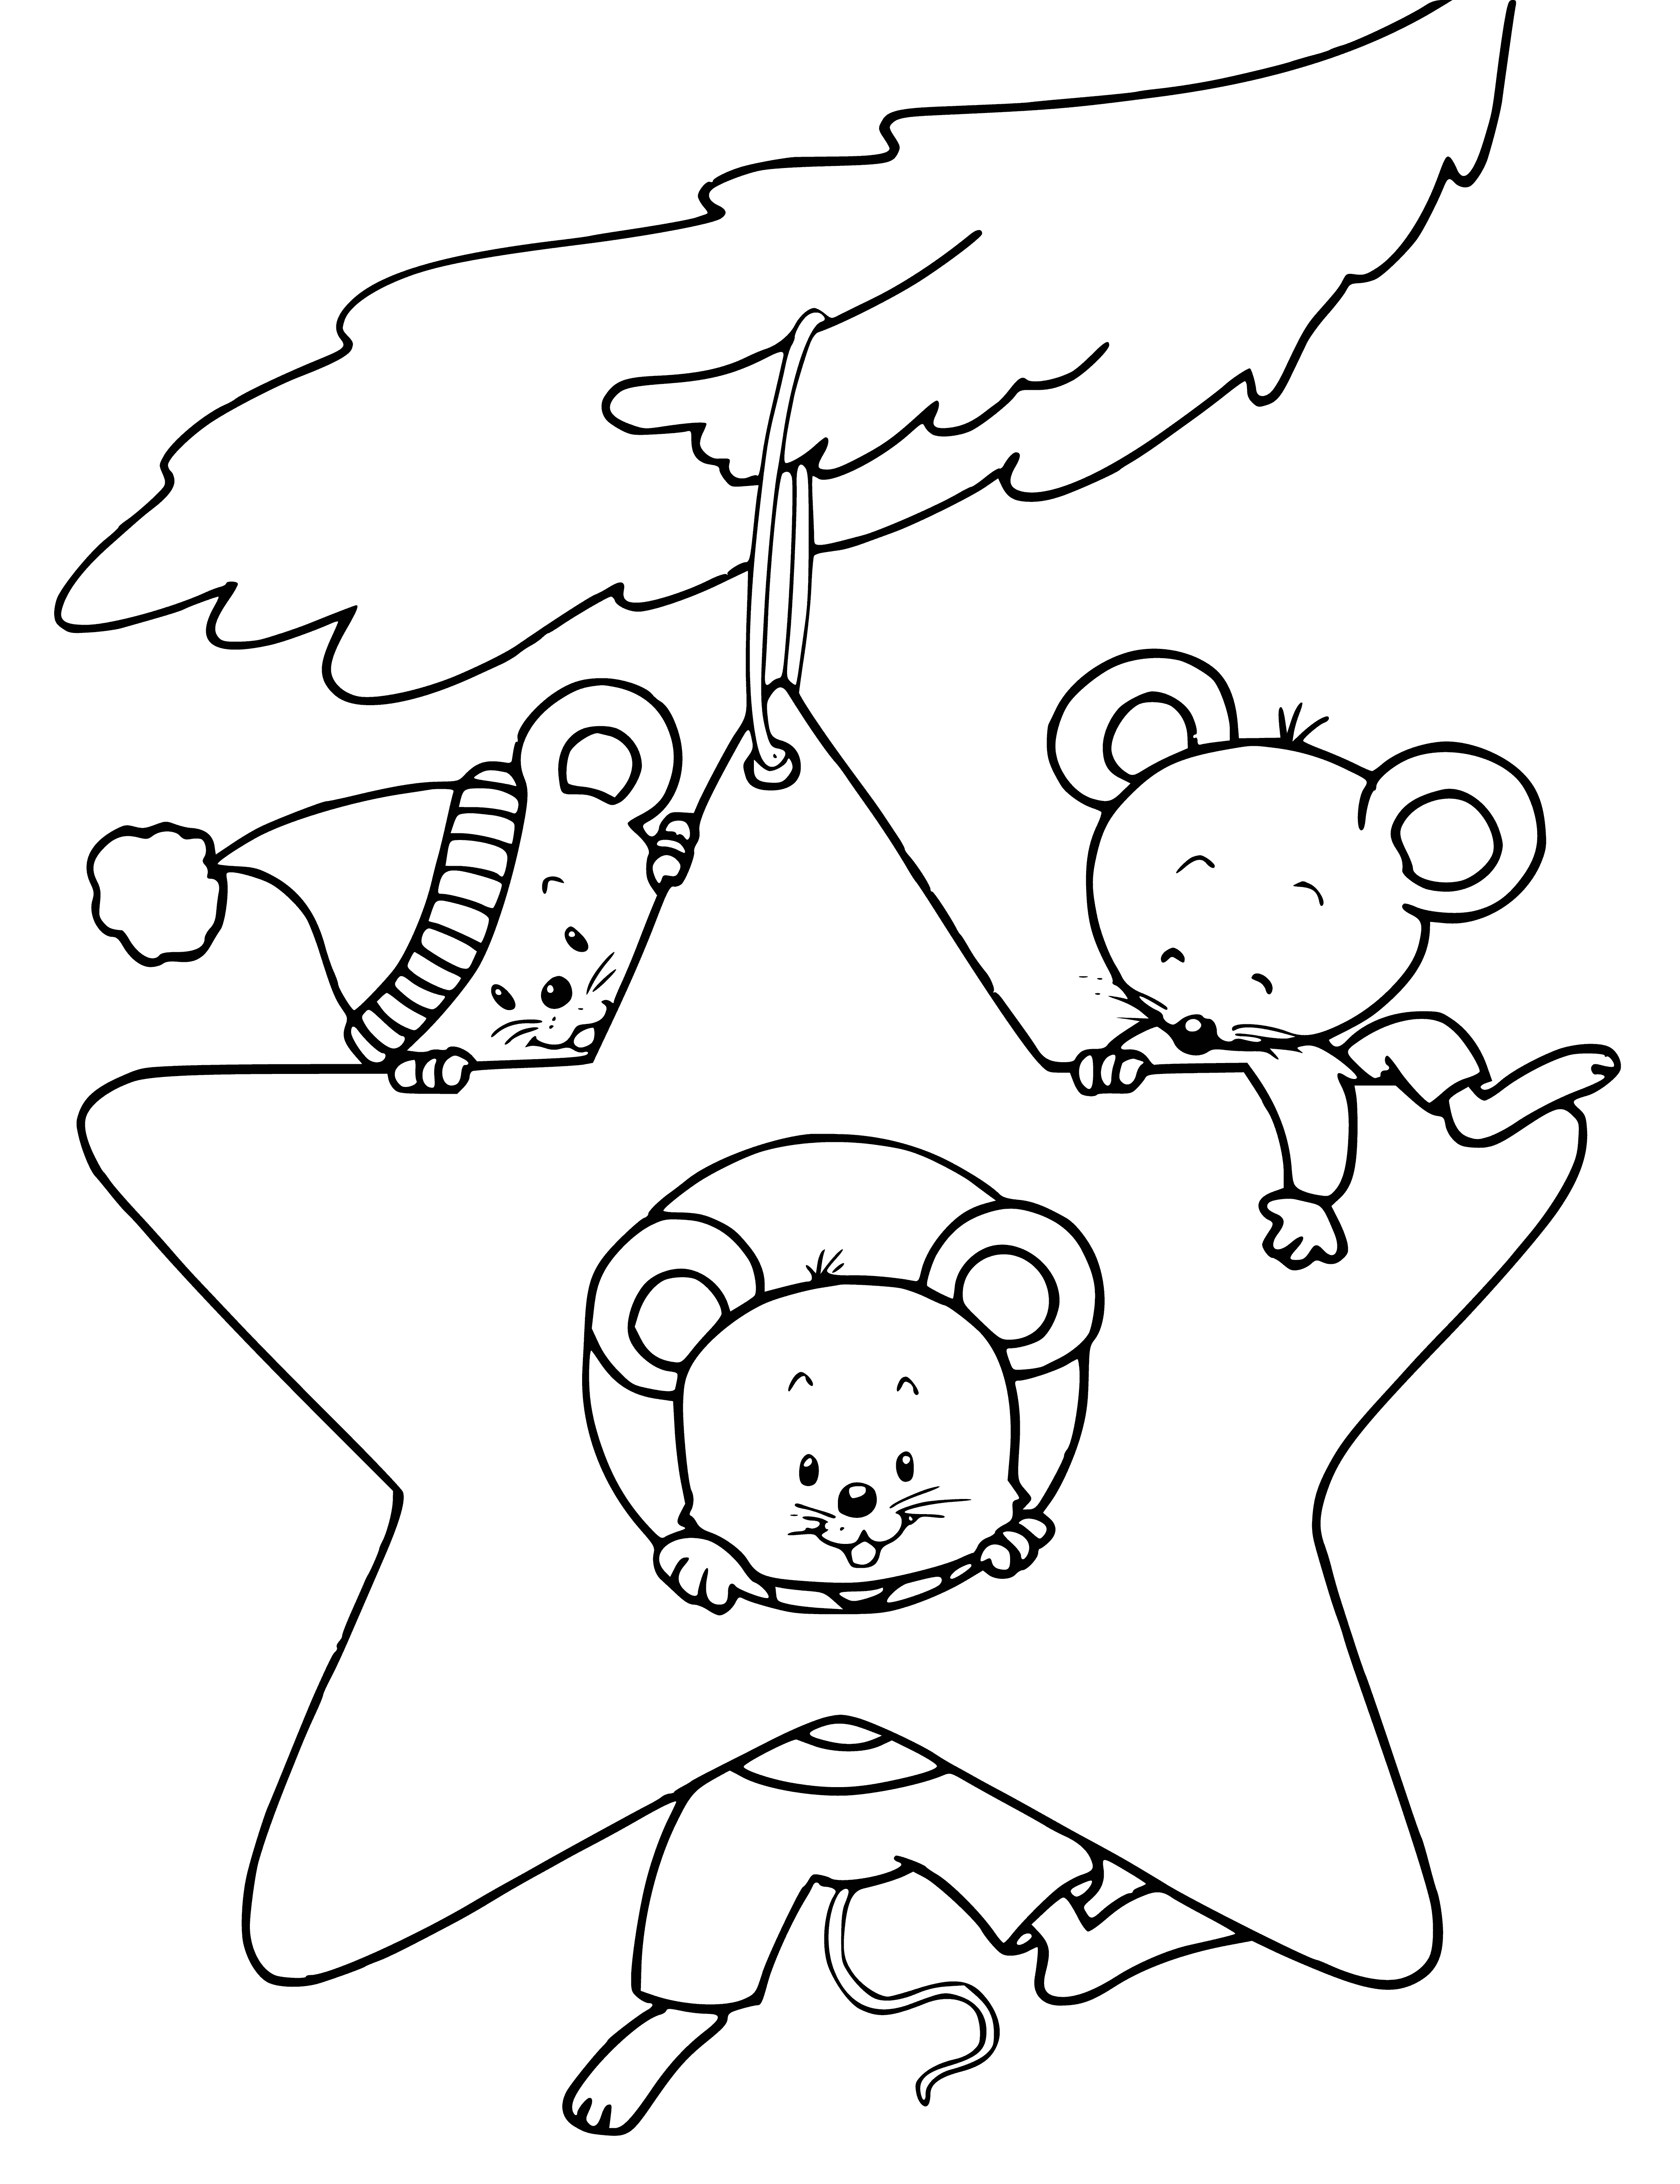 coloring page: A large rat sits atop a tree branch surrounded by small mice admiring it; beady eyes, long whiskers & a hanging tail.